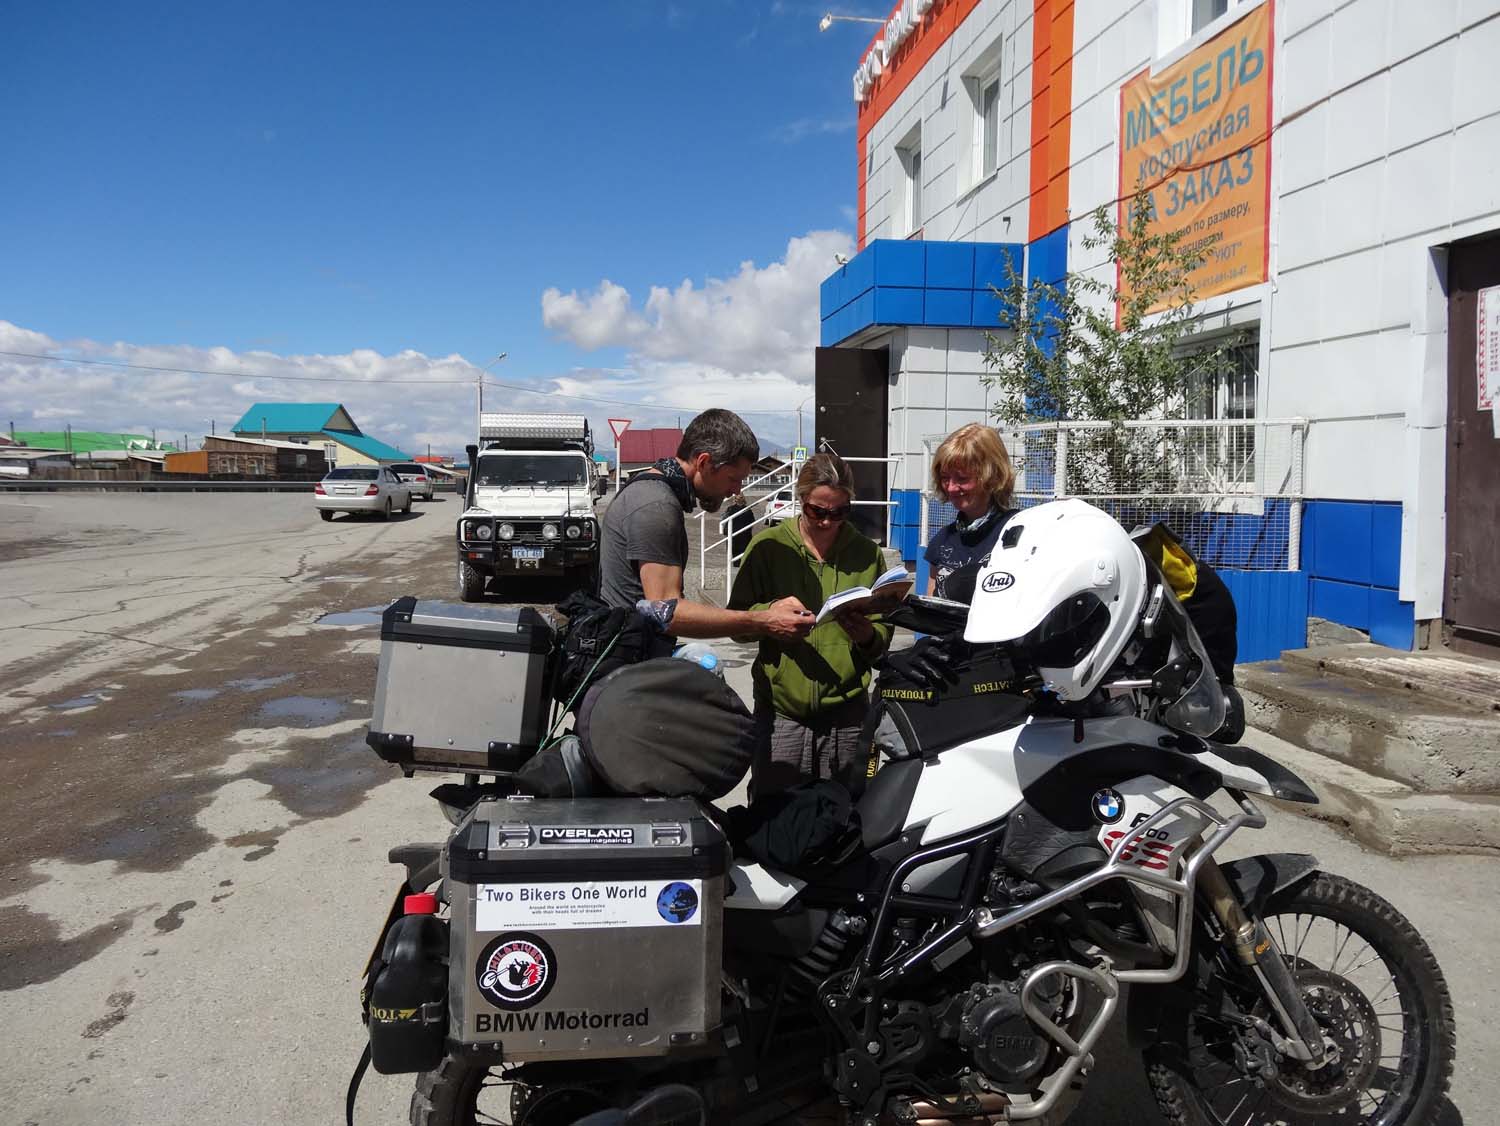 Swedish bikers on their way to Mongolia - swapping stories, maps and sim cards